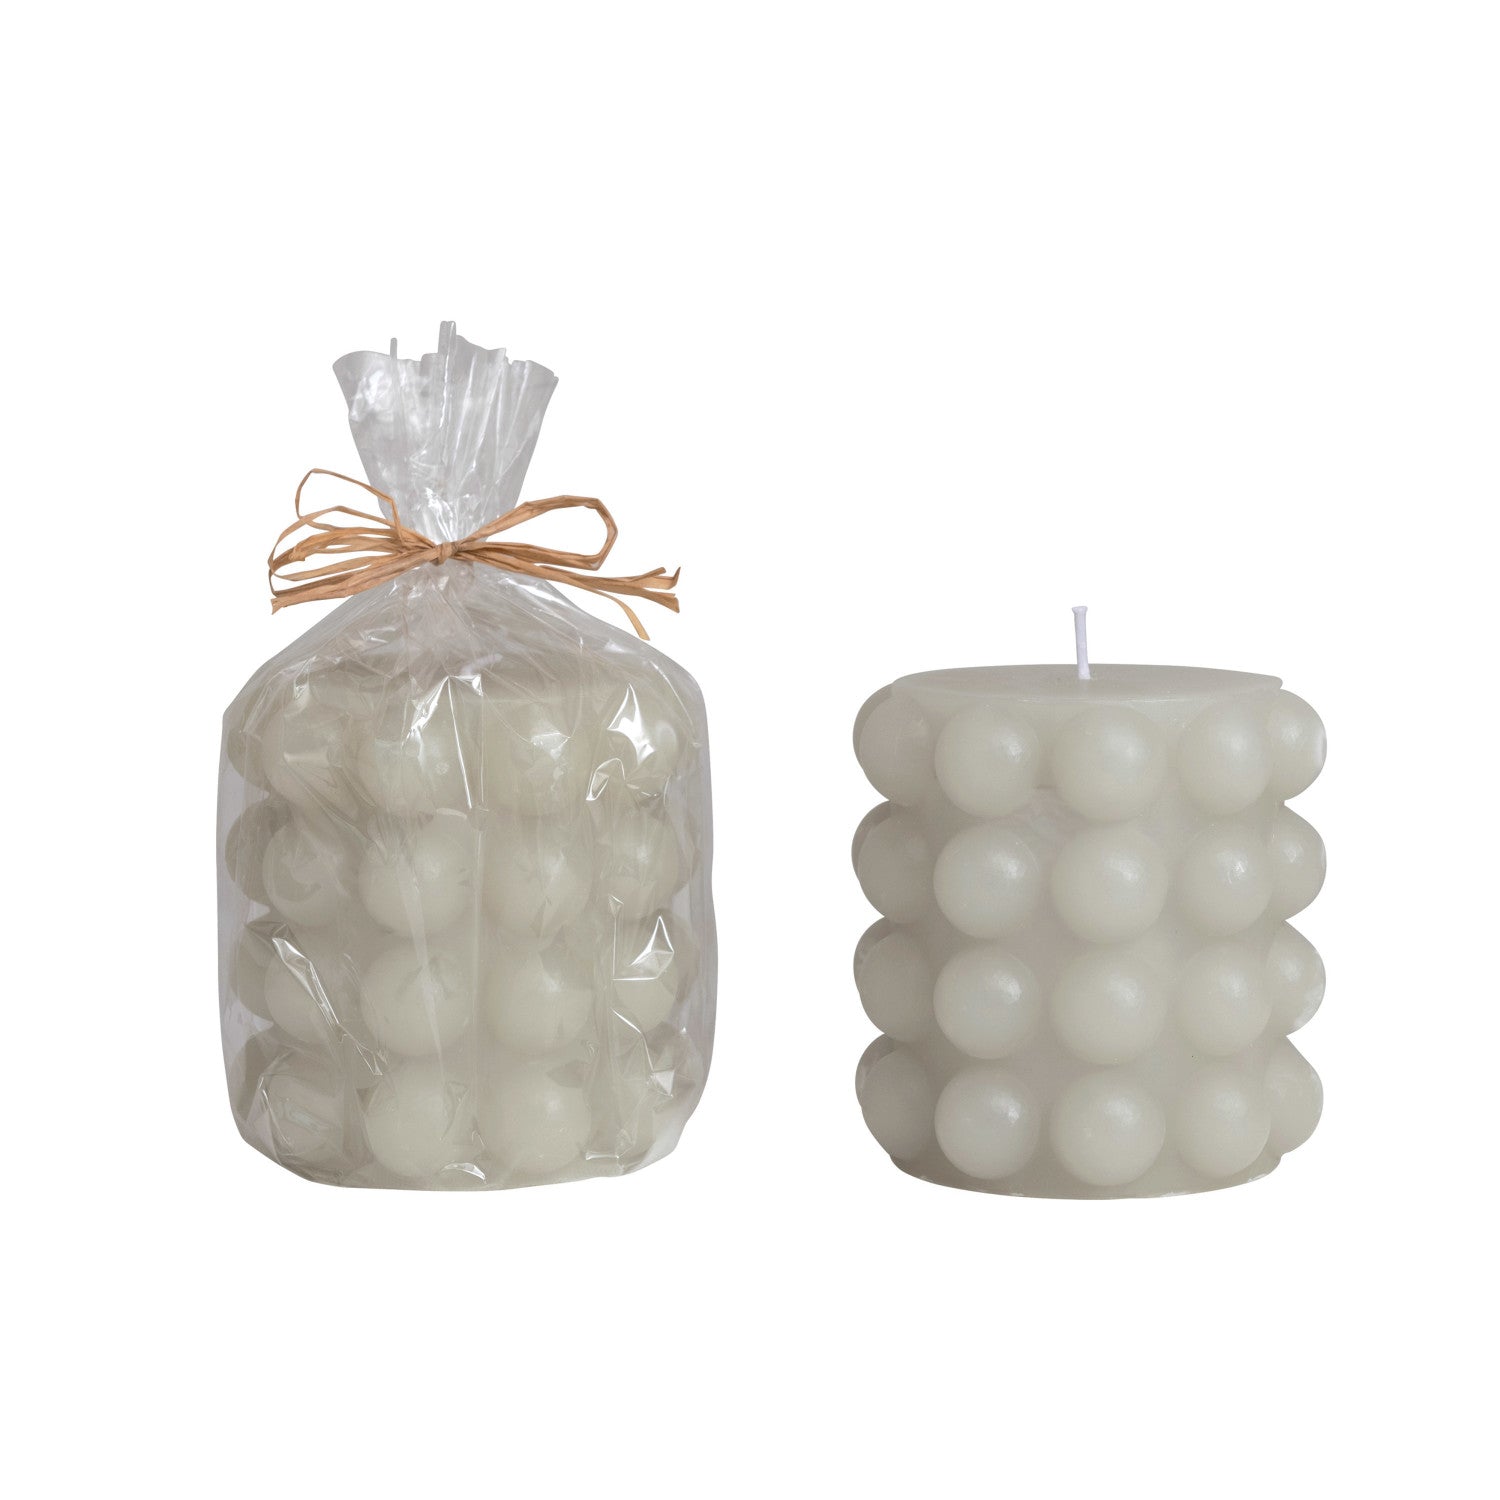 Unscented Dove Grey Hobnail 4" Pillar Candle